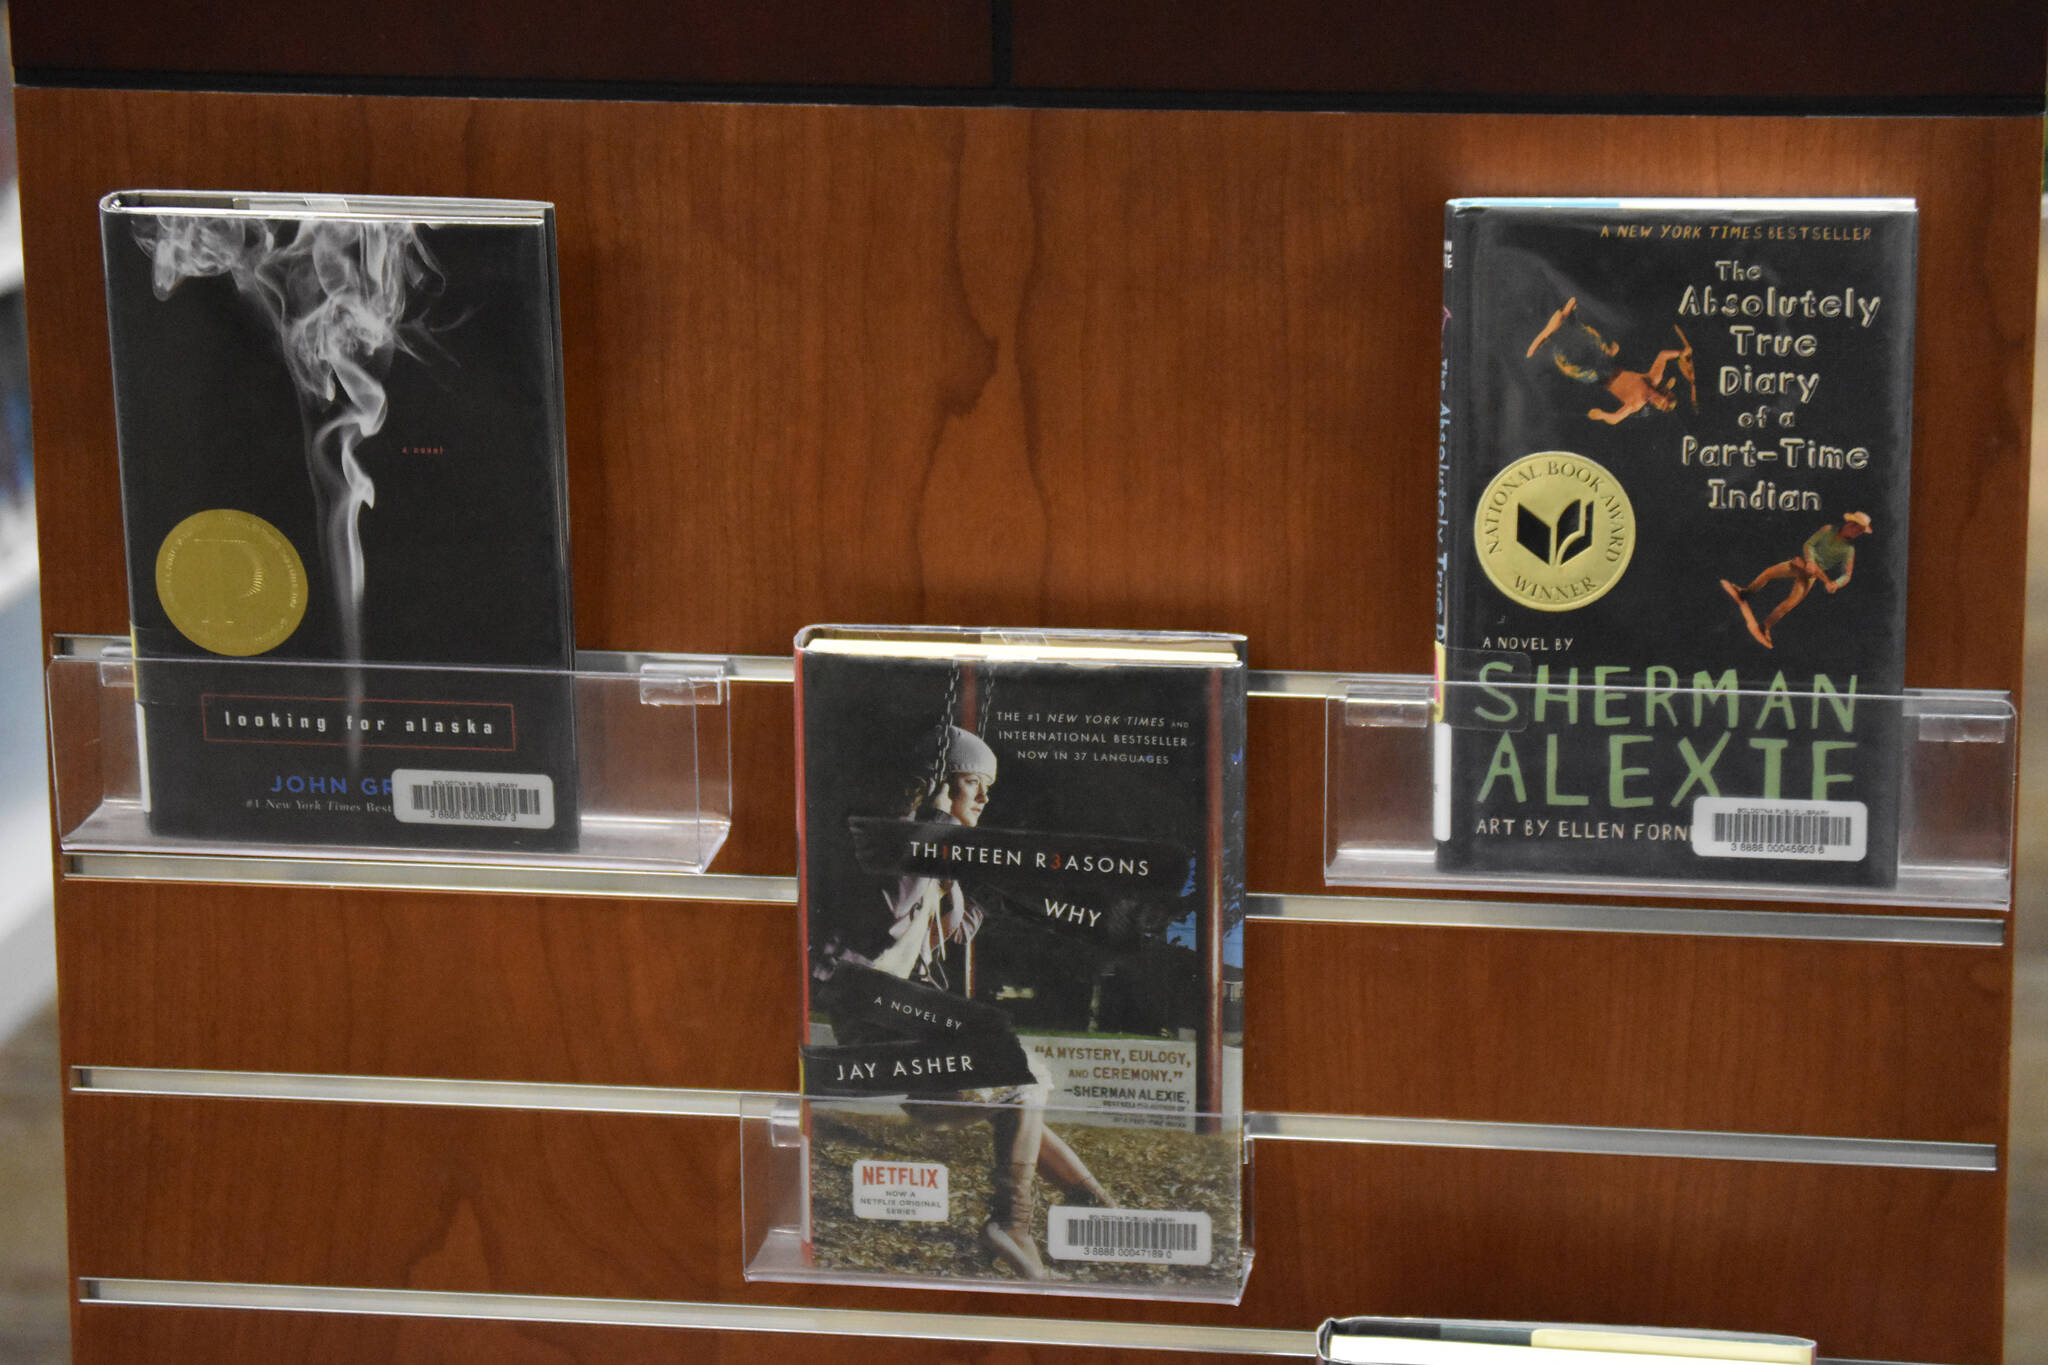 Examples of contemporary books that have been banned or challenged in recent years are displayed on Saturday, Sept. 24, 2022, at the Soldotna Public Library in Soldotna, Alaska. (Jake Dye/Peninsula Clarion)